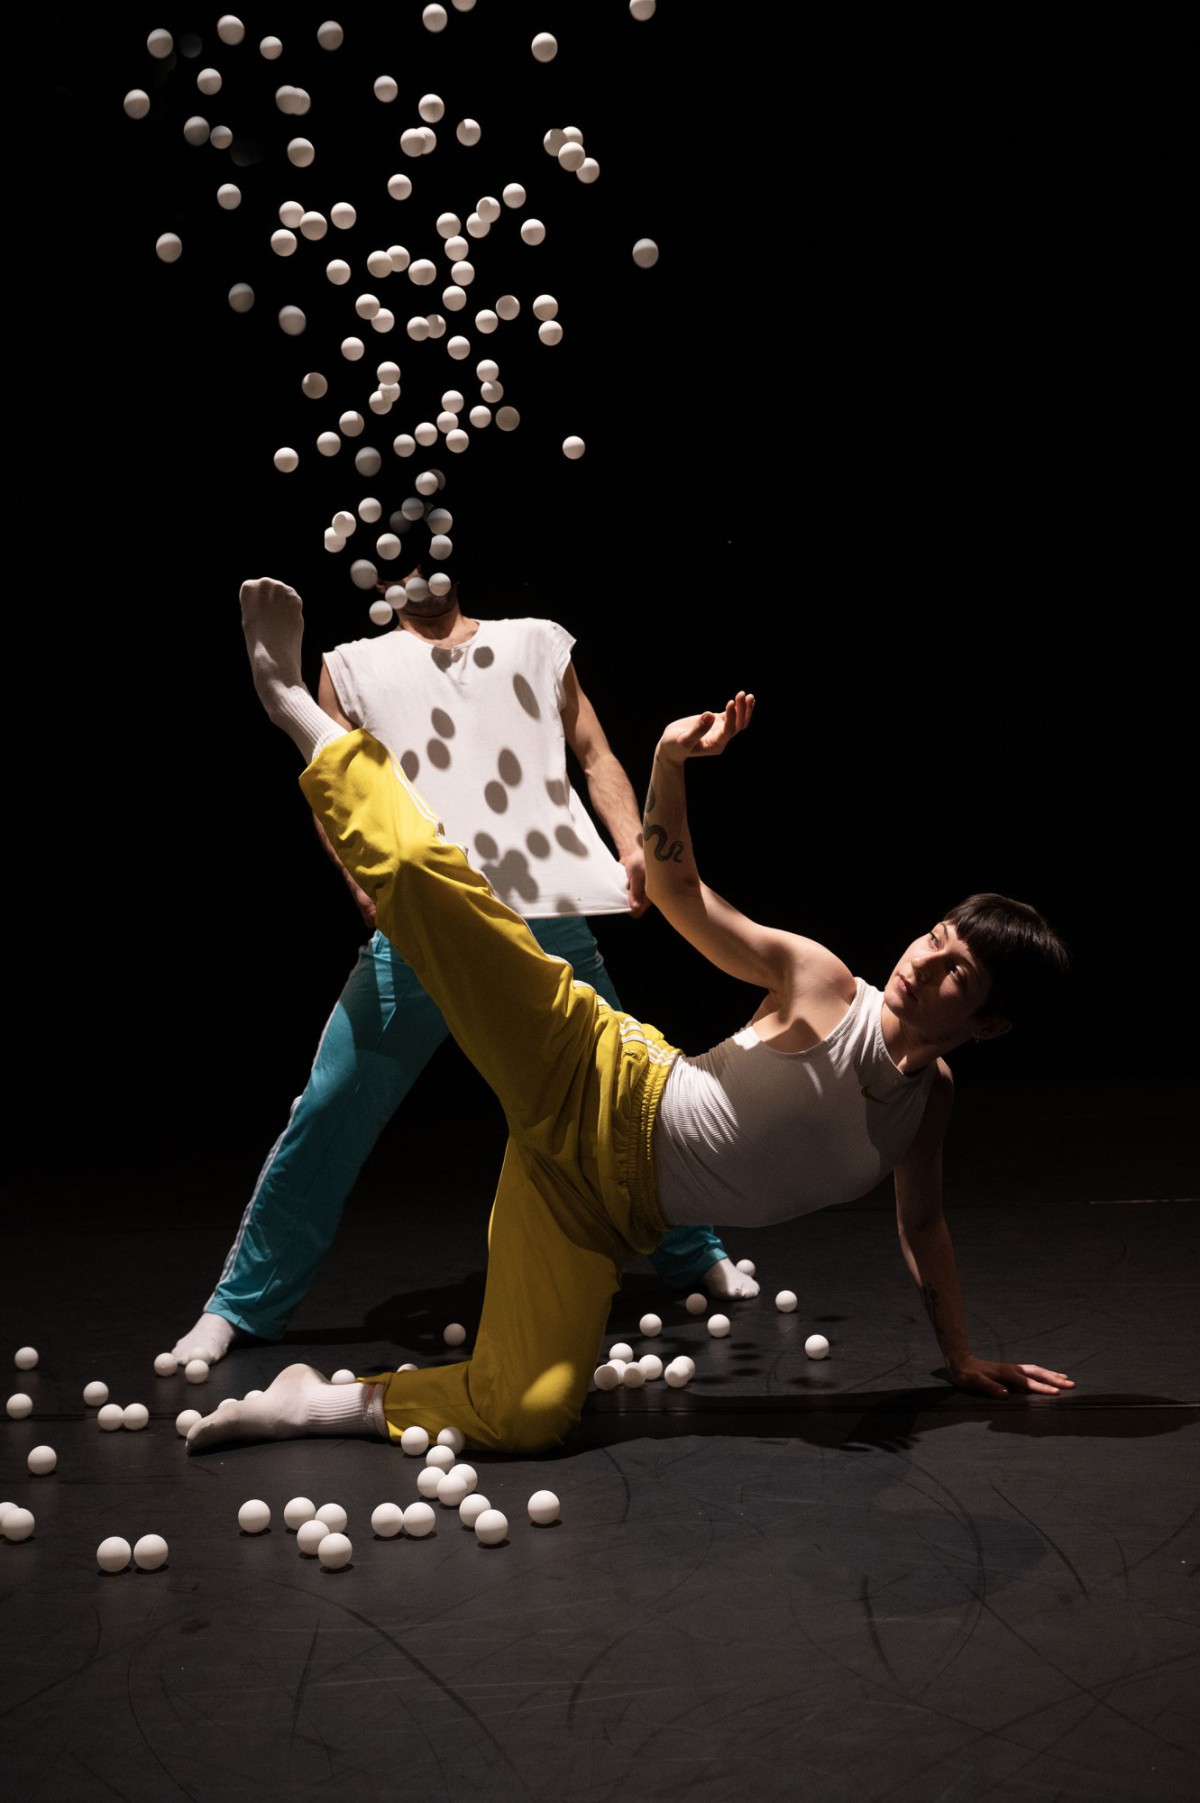 Two dancers in movement with many falling Ping Pong balls